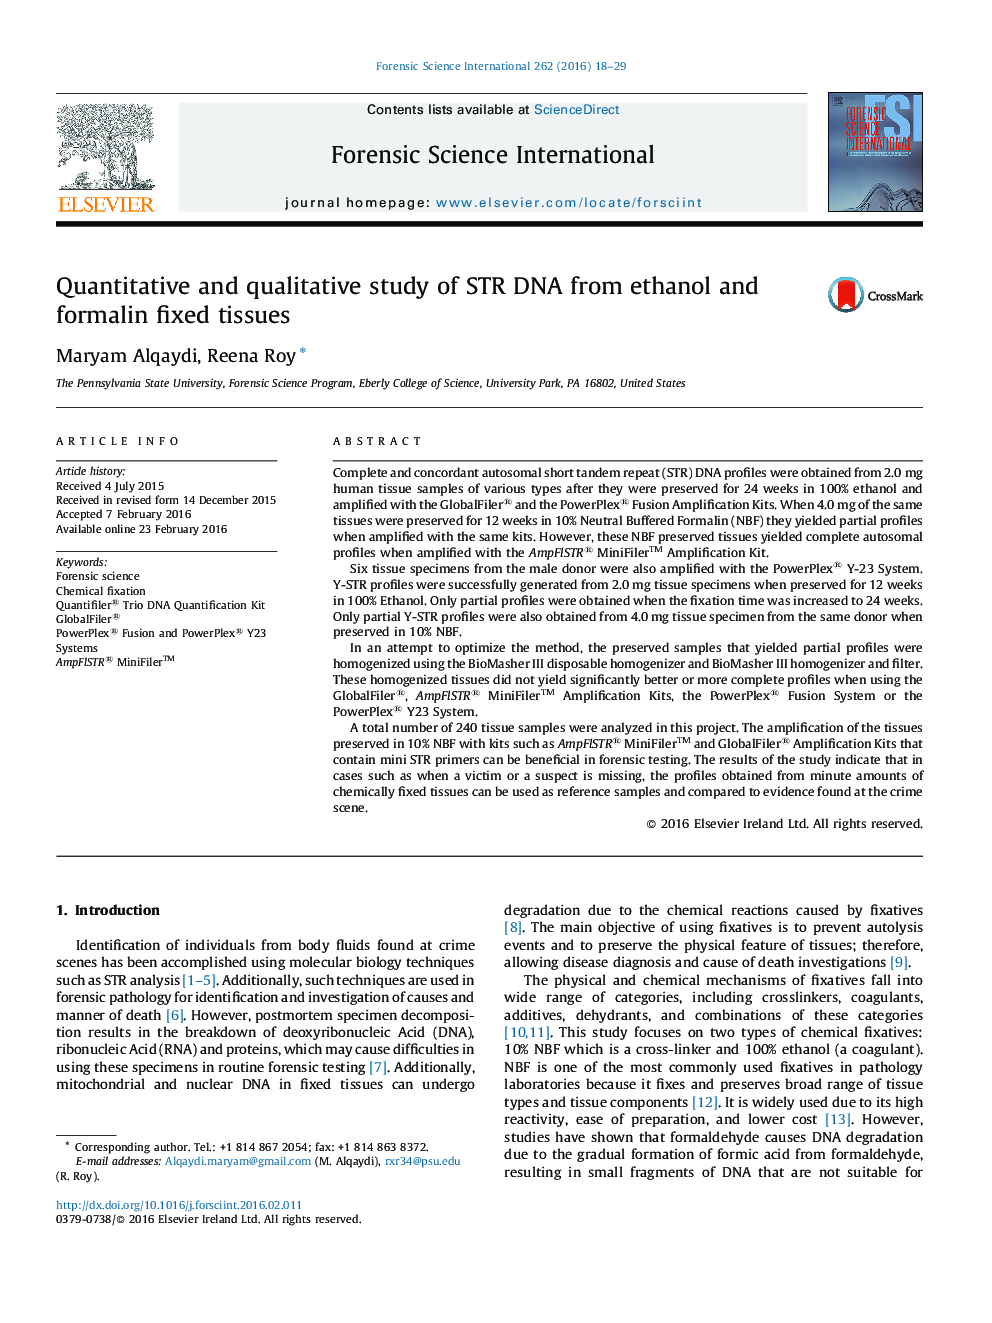 Quantitative and qualitative study of STR DNA from ethanol and formalin fixed tissues